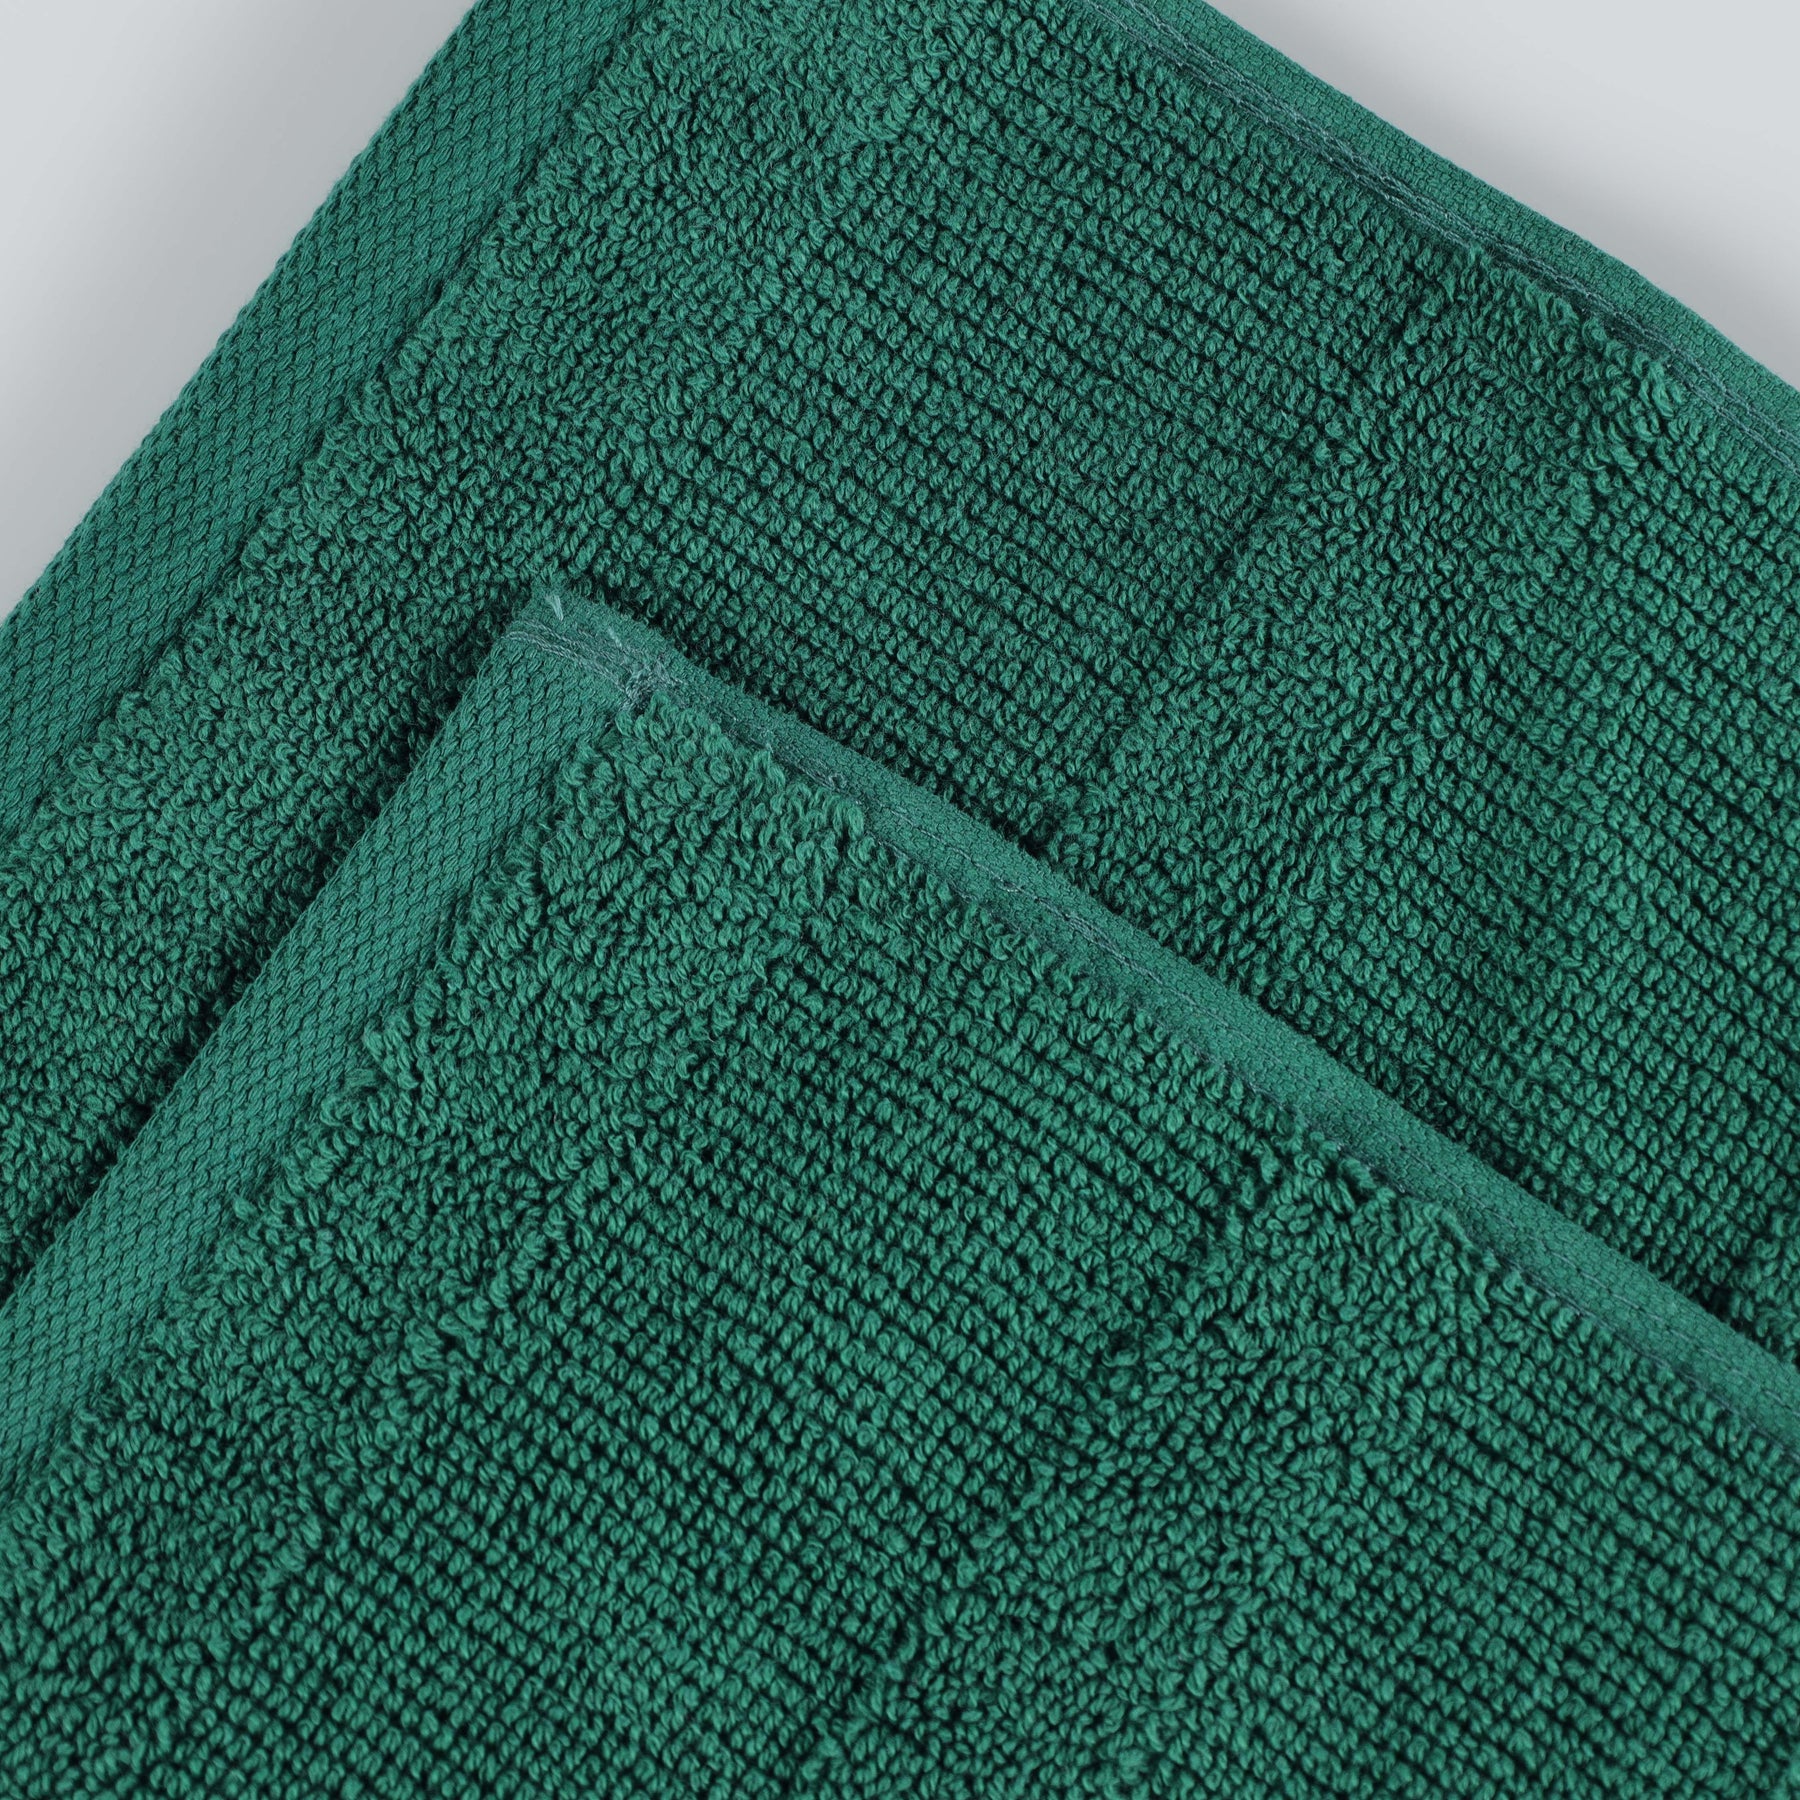 Roma Cotton Ribbed Textured Soft Absorbent 12 Piece Assorted Towel Set - Evergreen